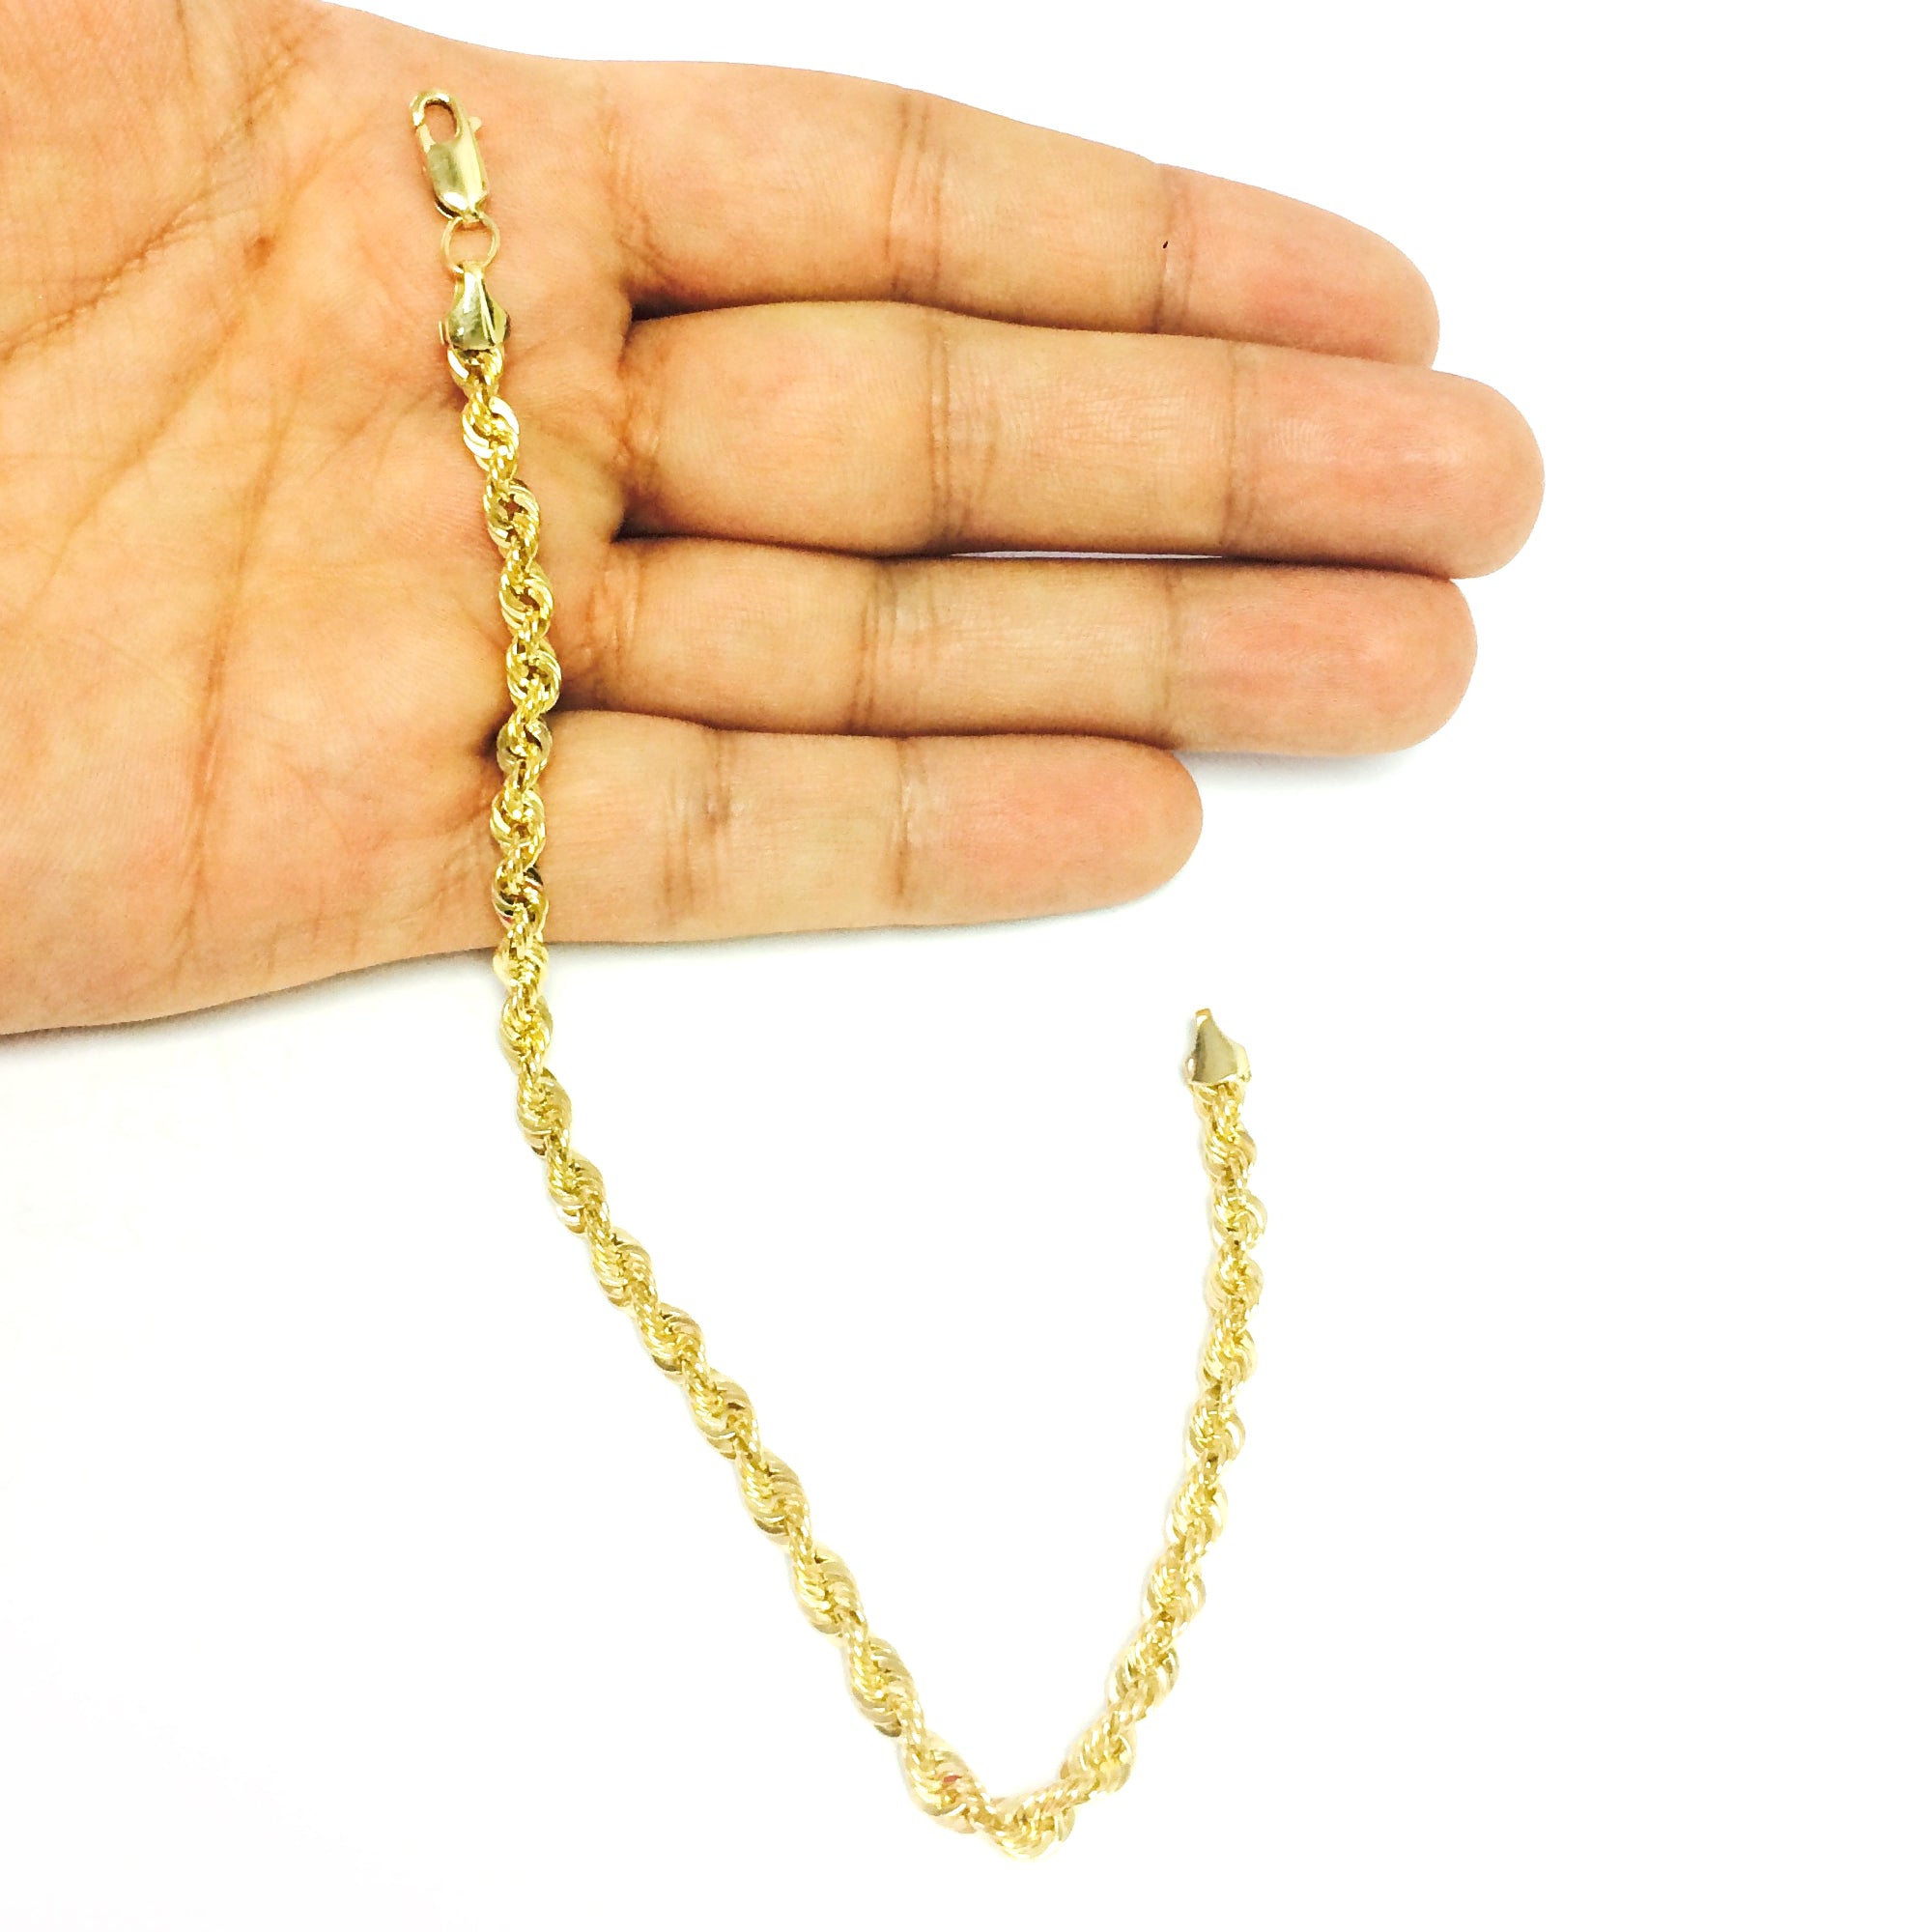 14K Yellow Gold Filled Solid Rope Chain Bracelet, 4.5mm, 8.5" fine designer jewelry for men and women